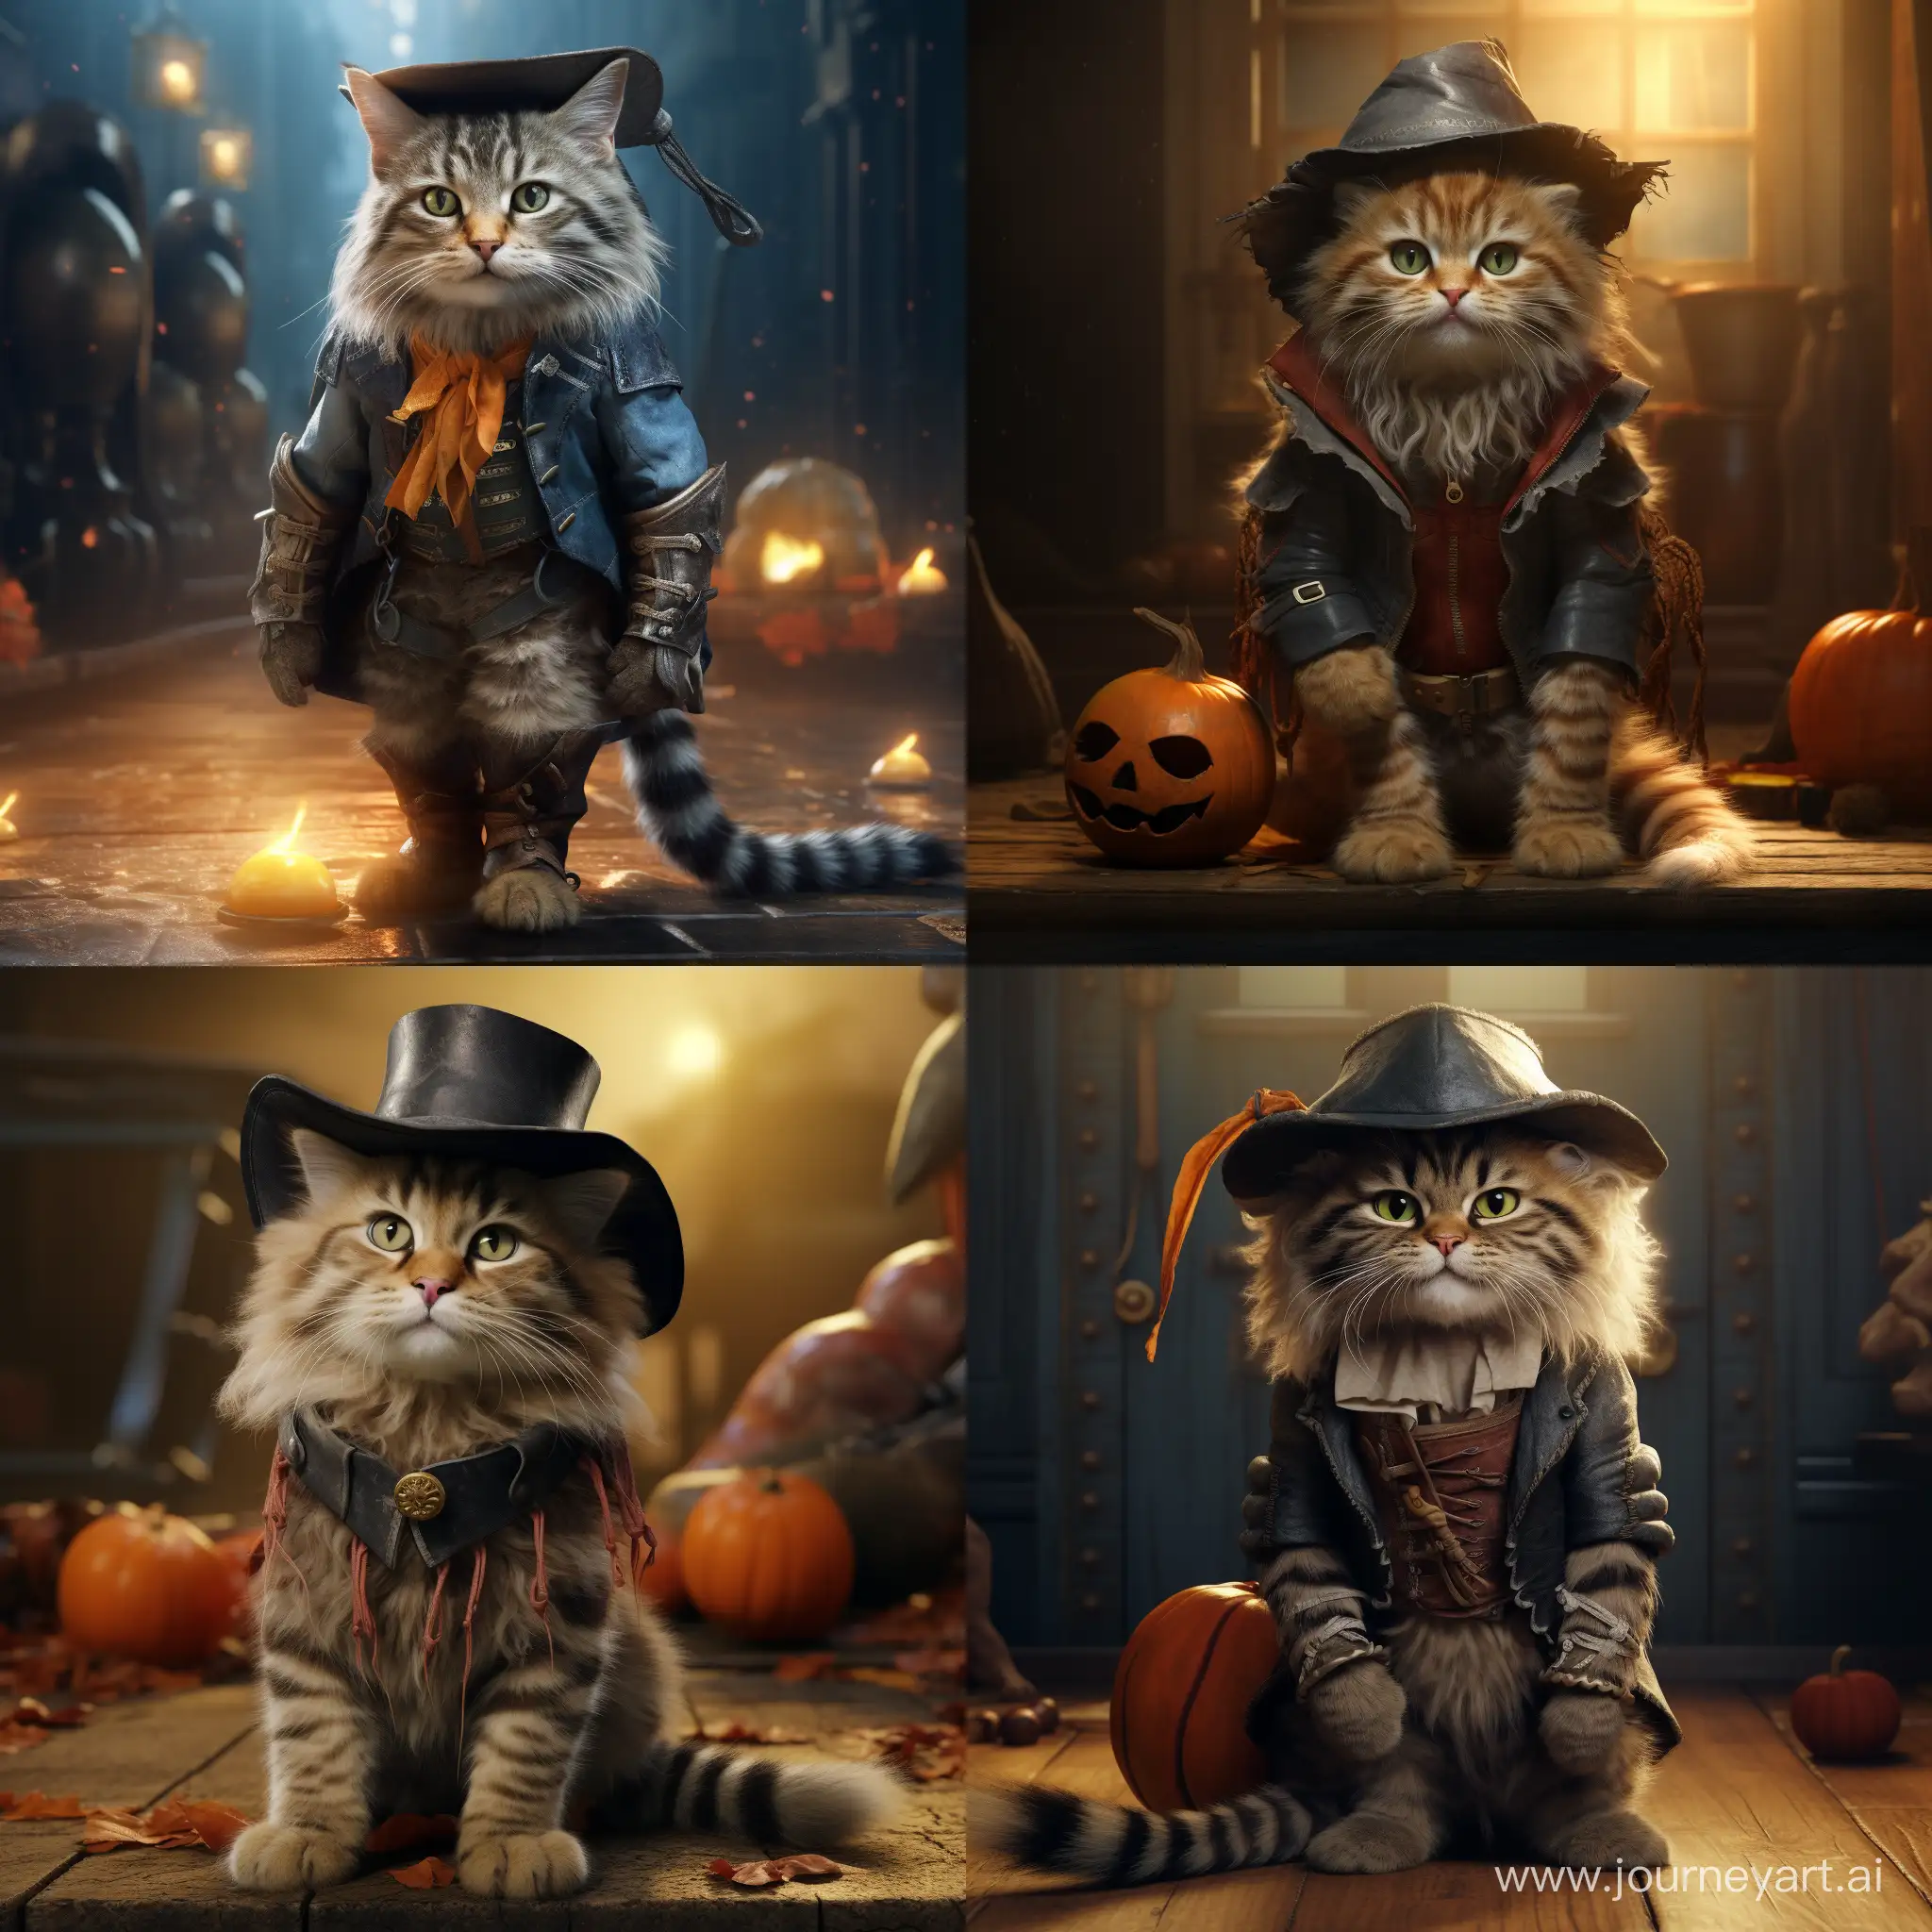 A realistic puss in boots with a kind face celebrates Halloween. UHD,4k, realistic